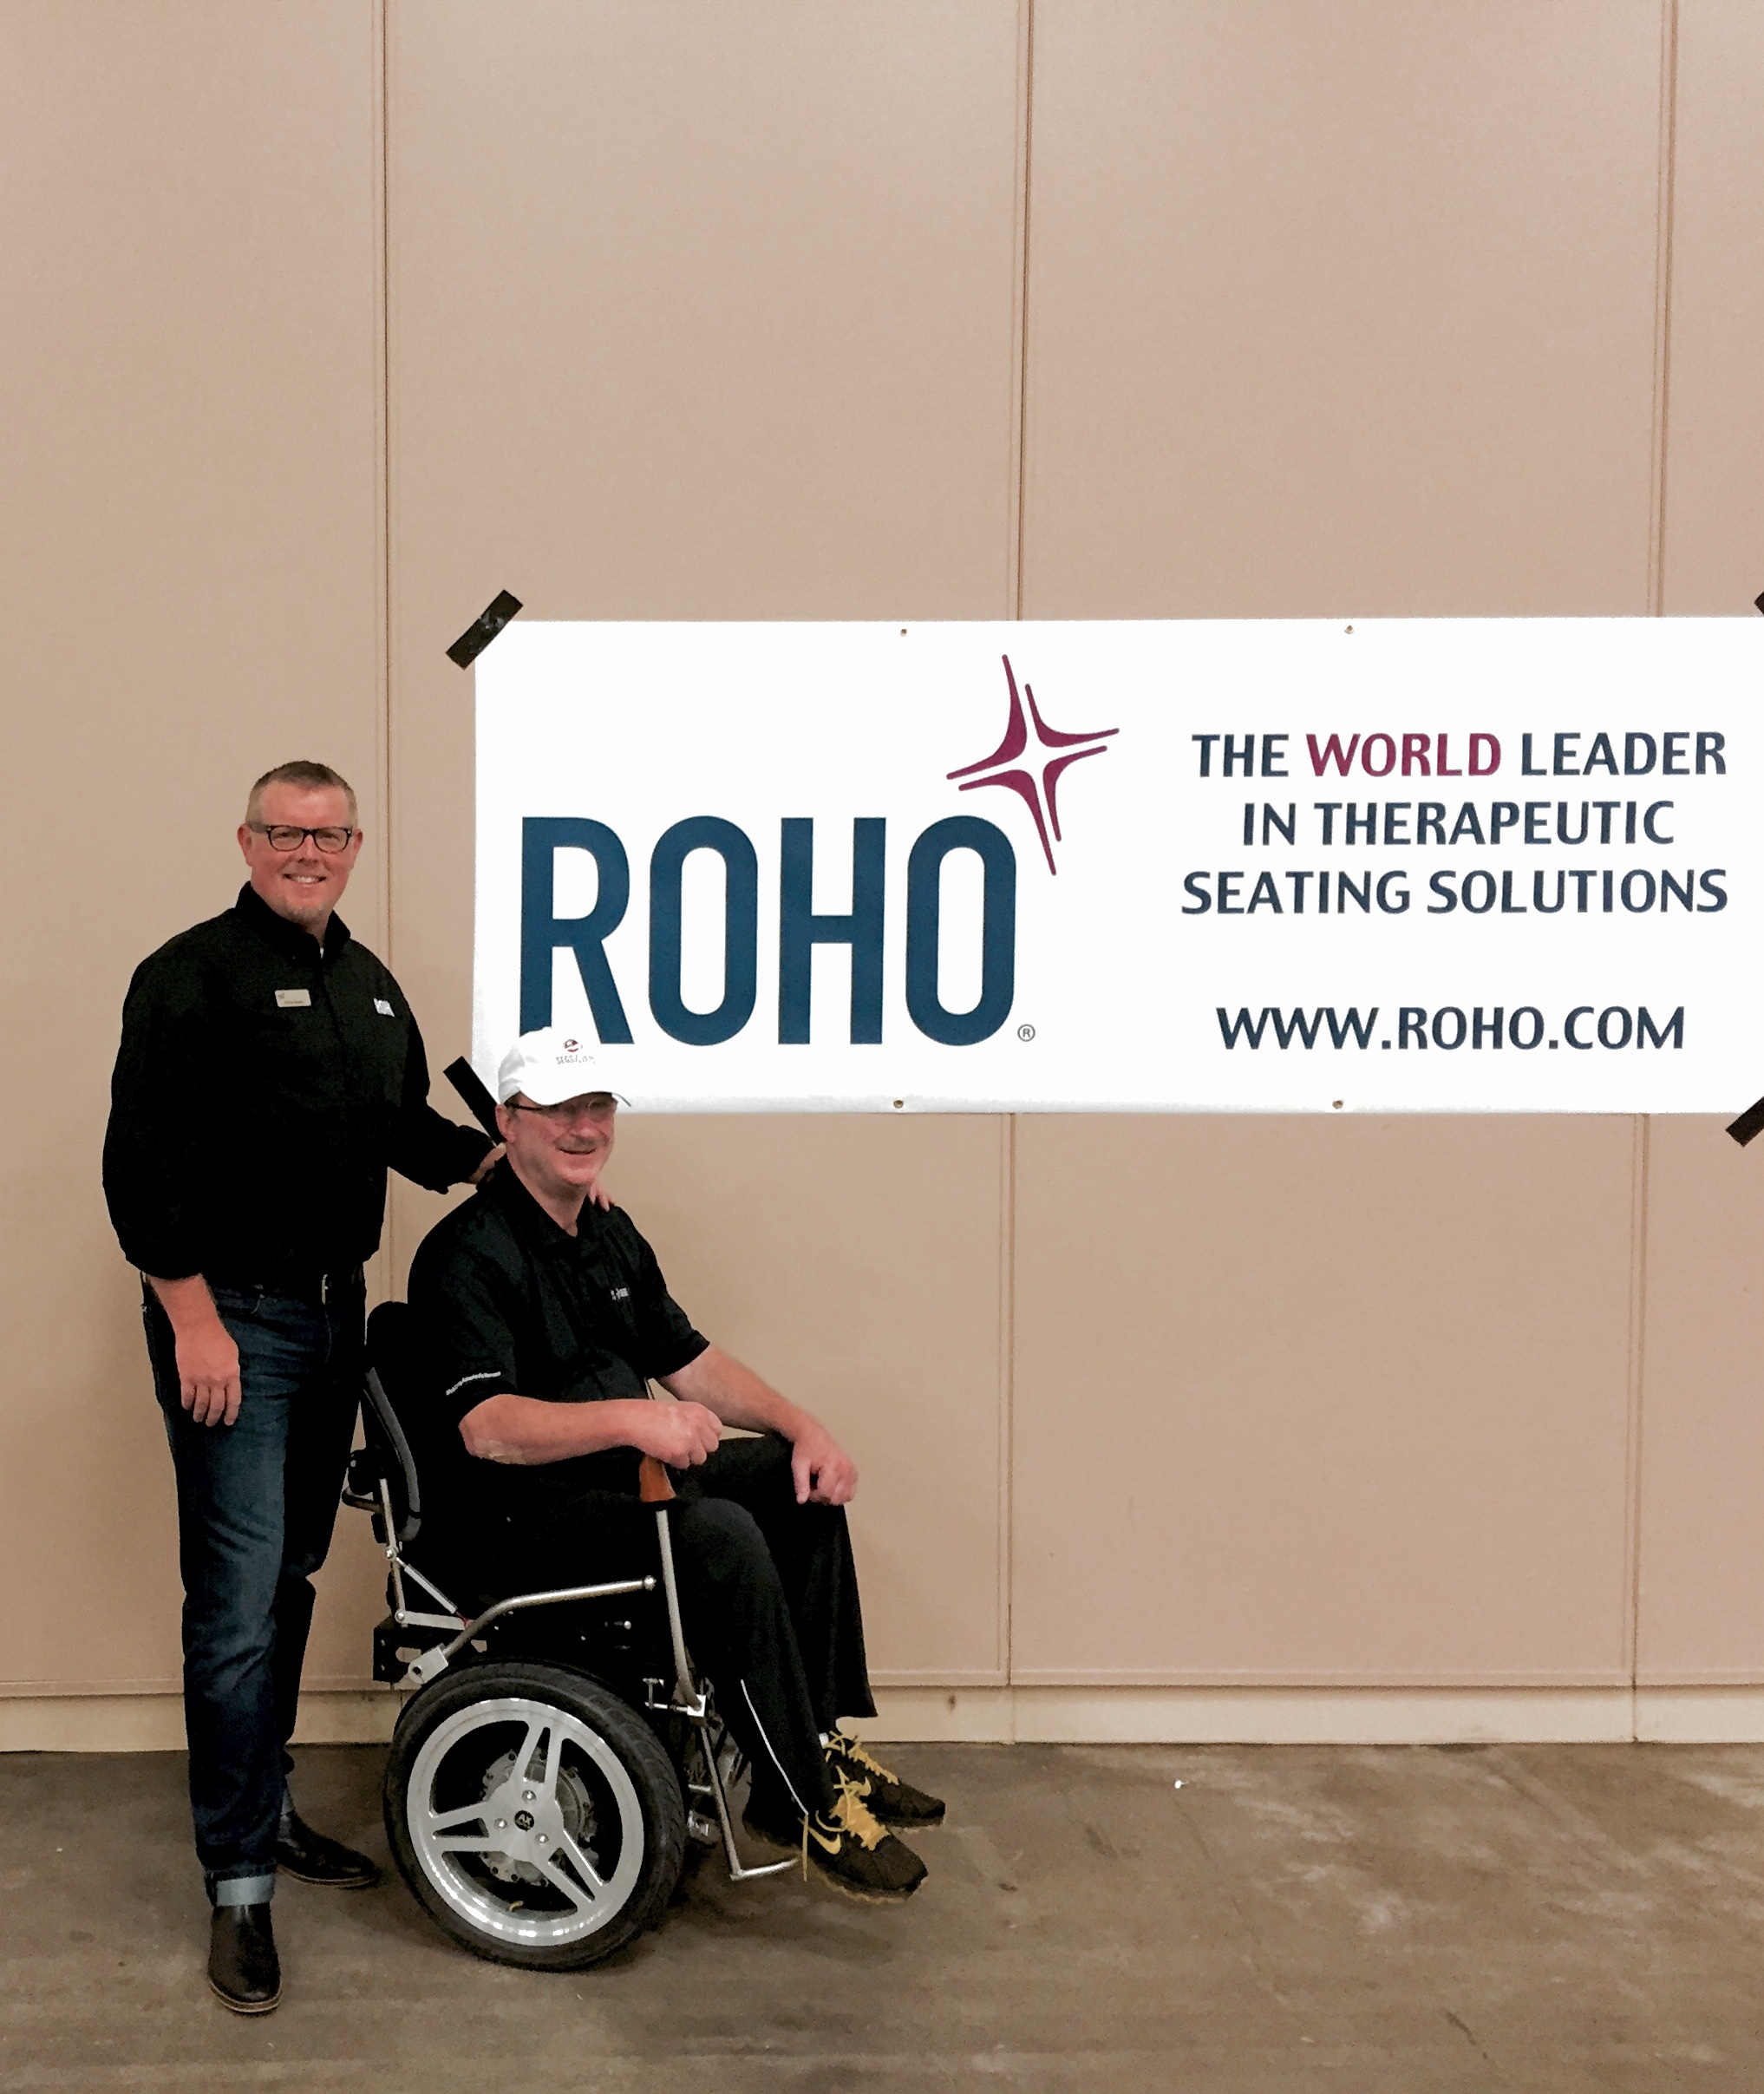 L-R: Patrick Meeker, Senior Director of Global Sales for ROHO and Jerry Kerr, President and Co-Founder of Segs4Vets.